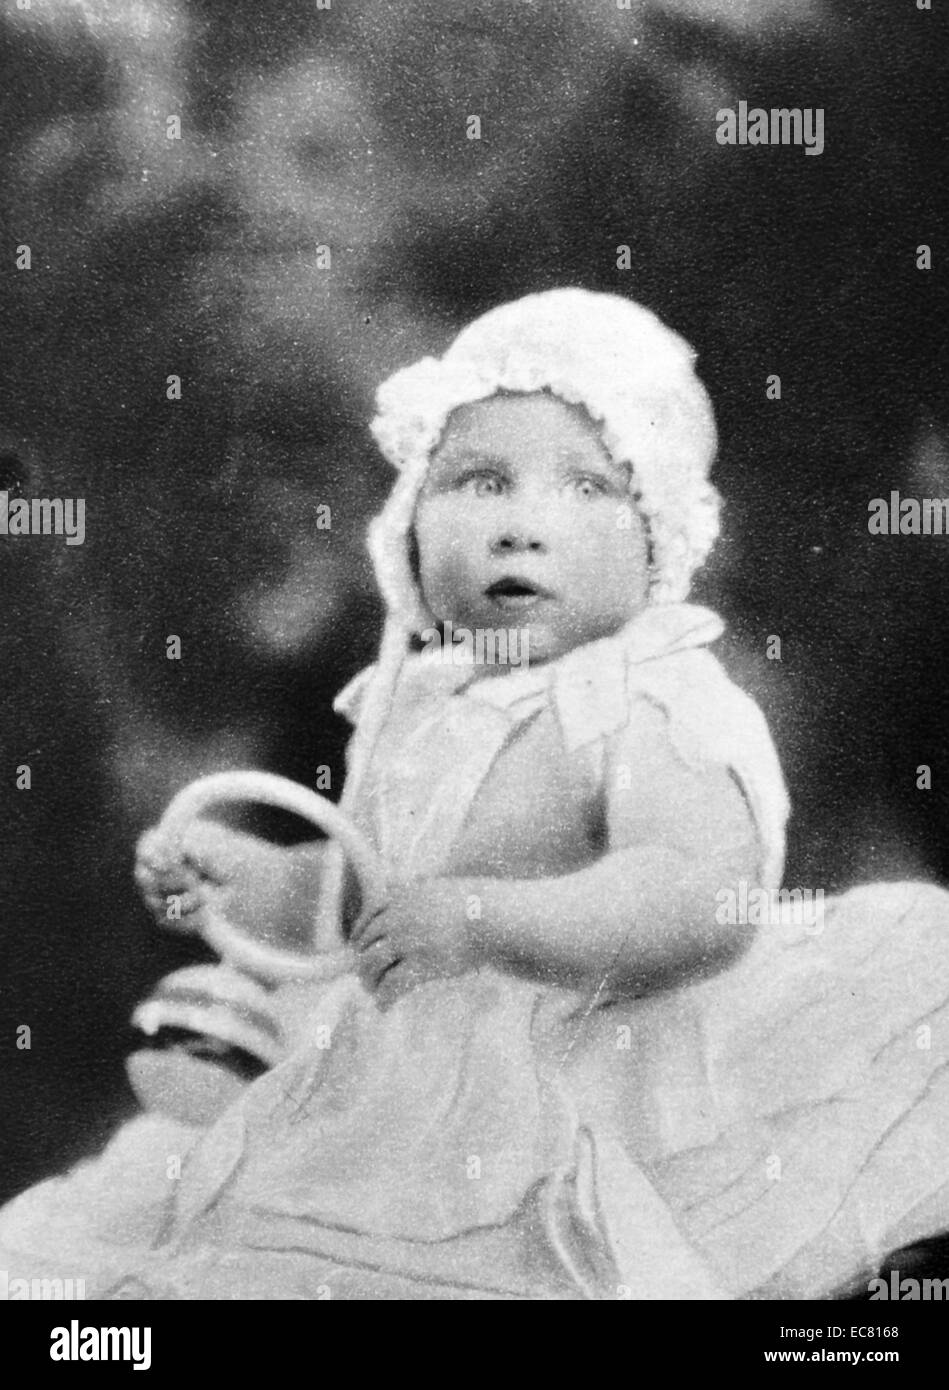 The young Princess Margret (sister of Queen Elizabeth II) aged five months. Stock Photo